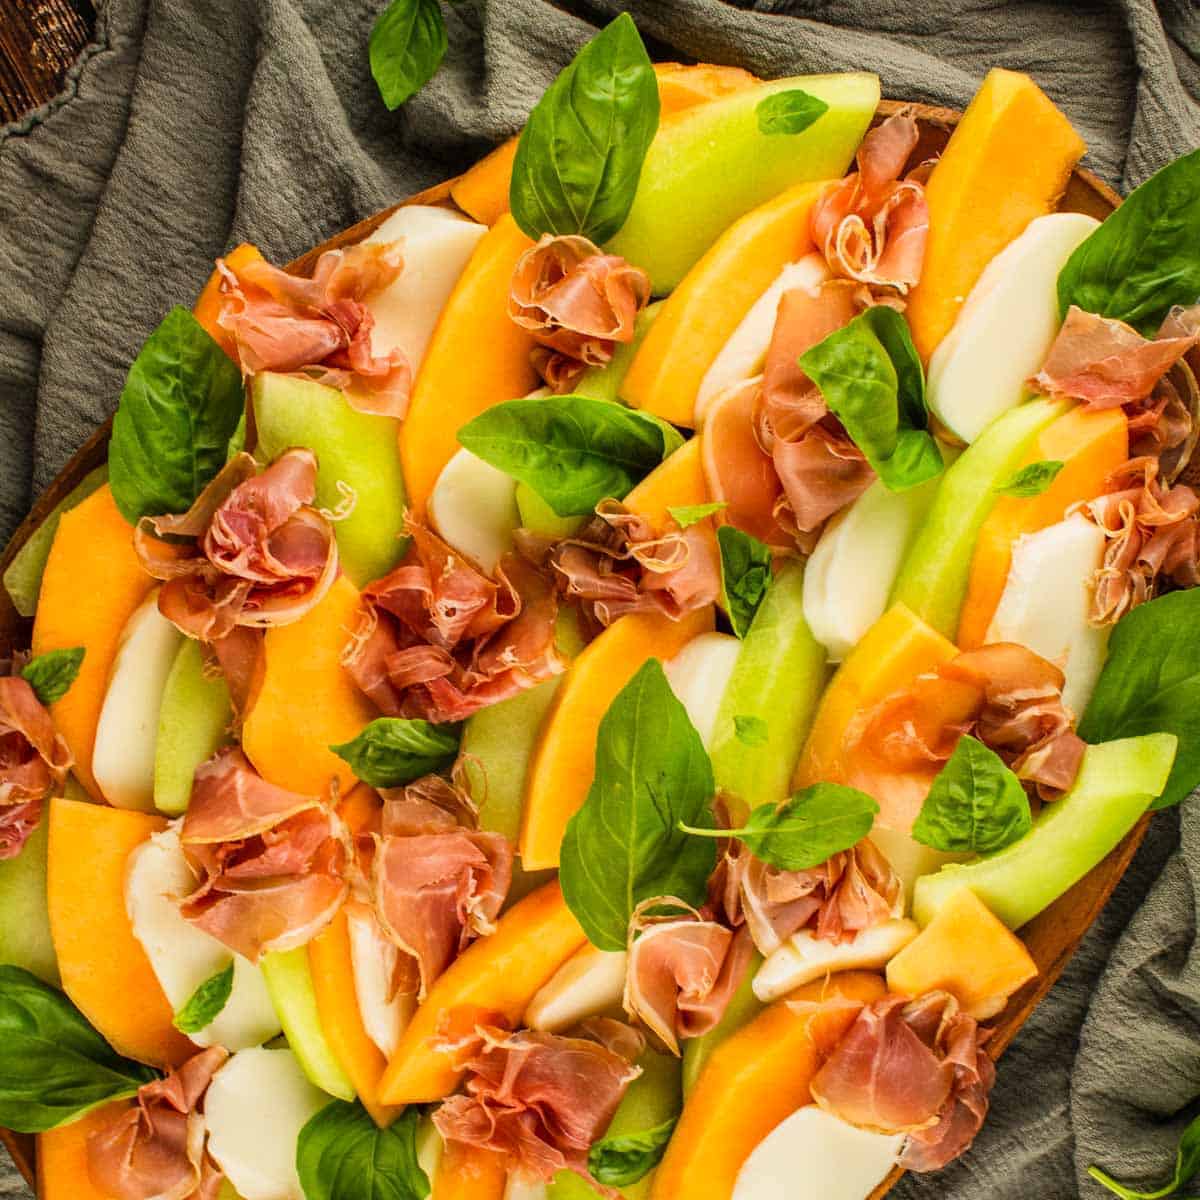 slices of honeydew and cantaloupe layered with mozzarella, fresh basil and prosciutto